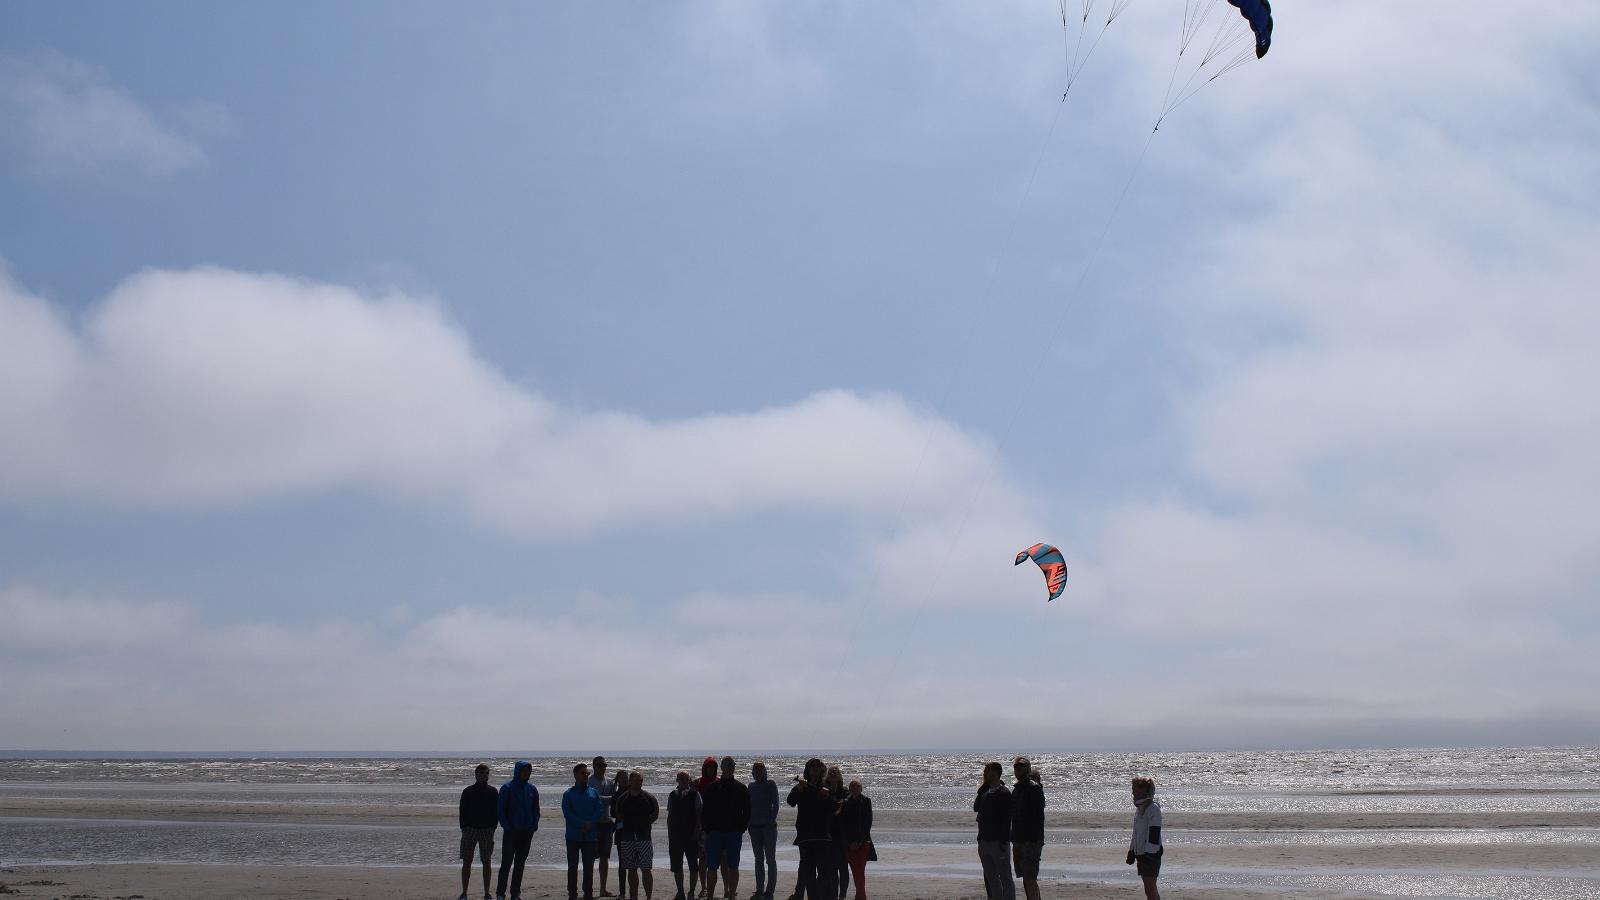 Kitesurf introductory training for groups at the Surf Center